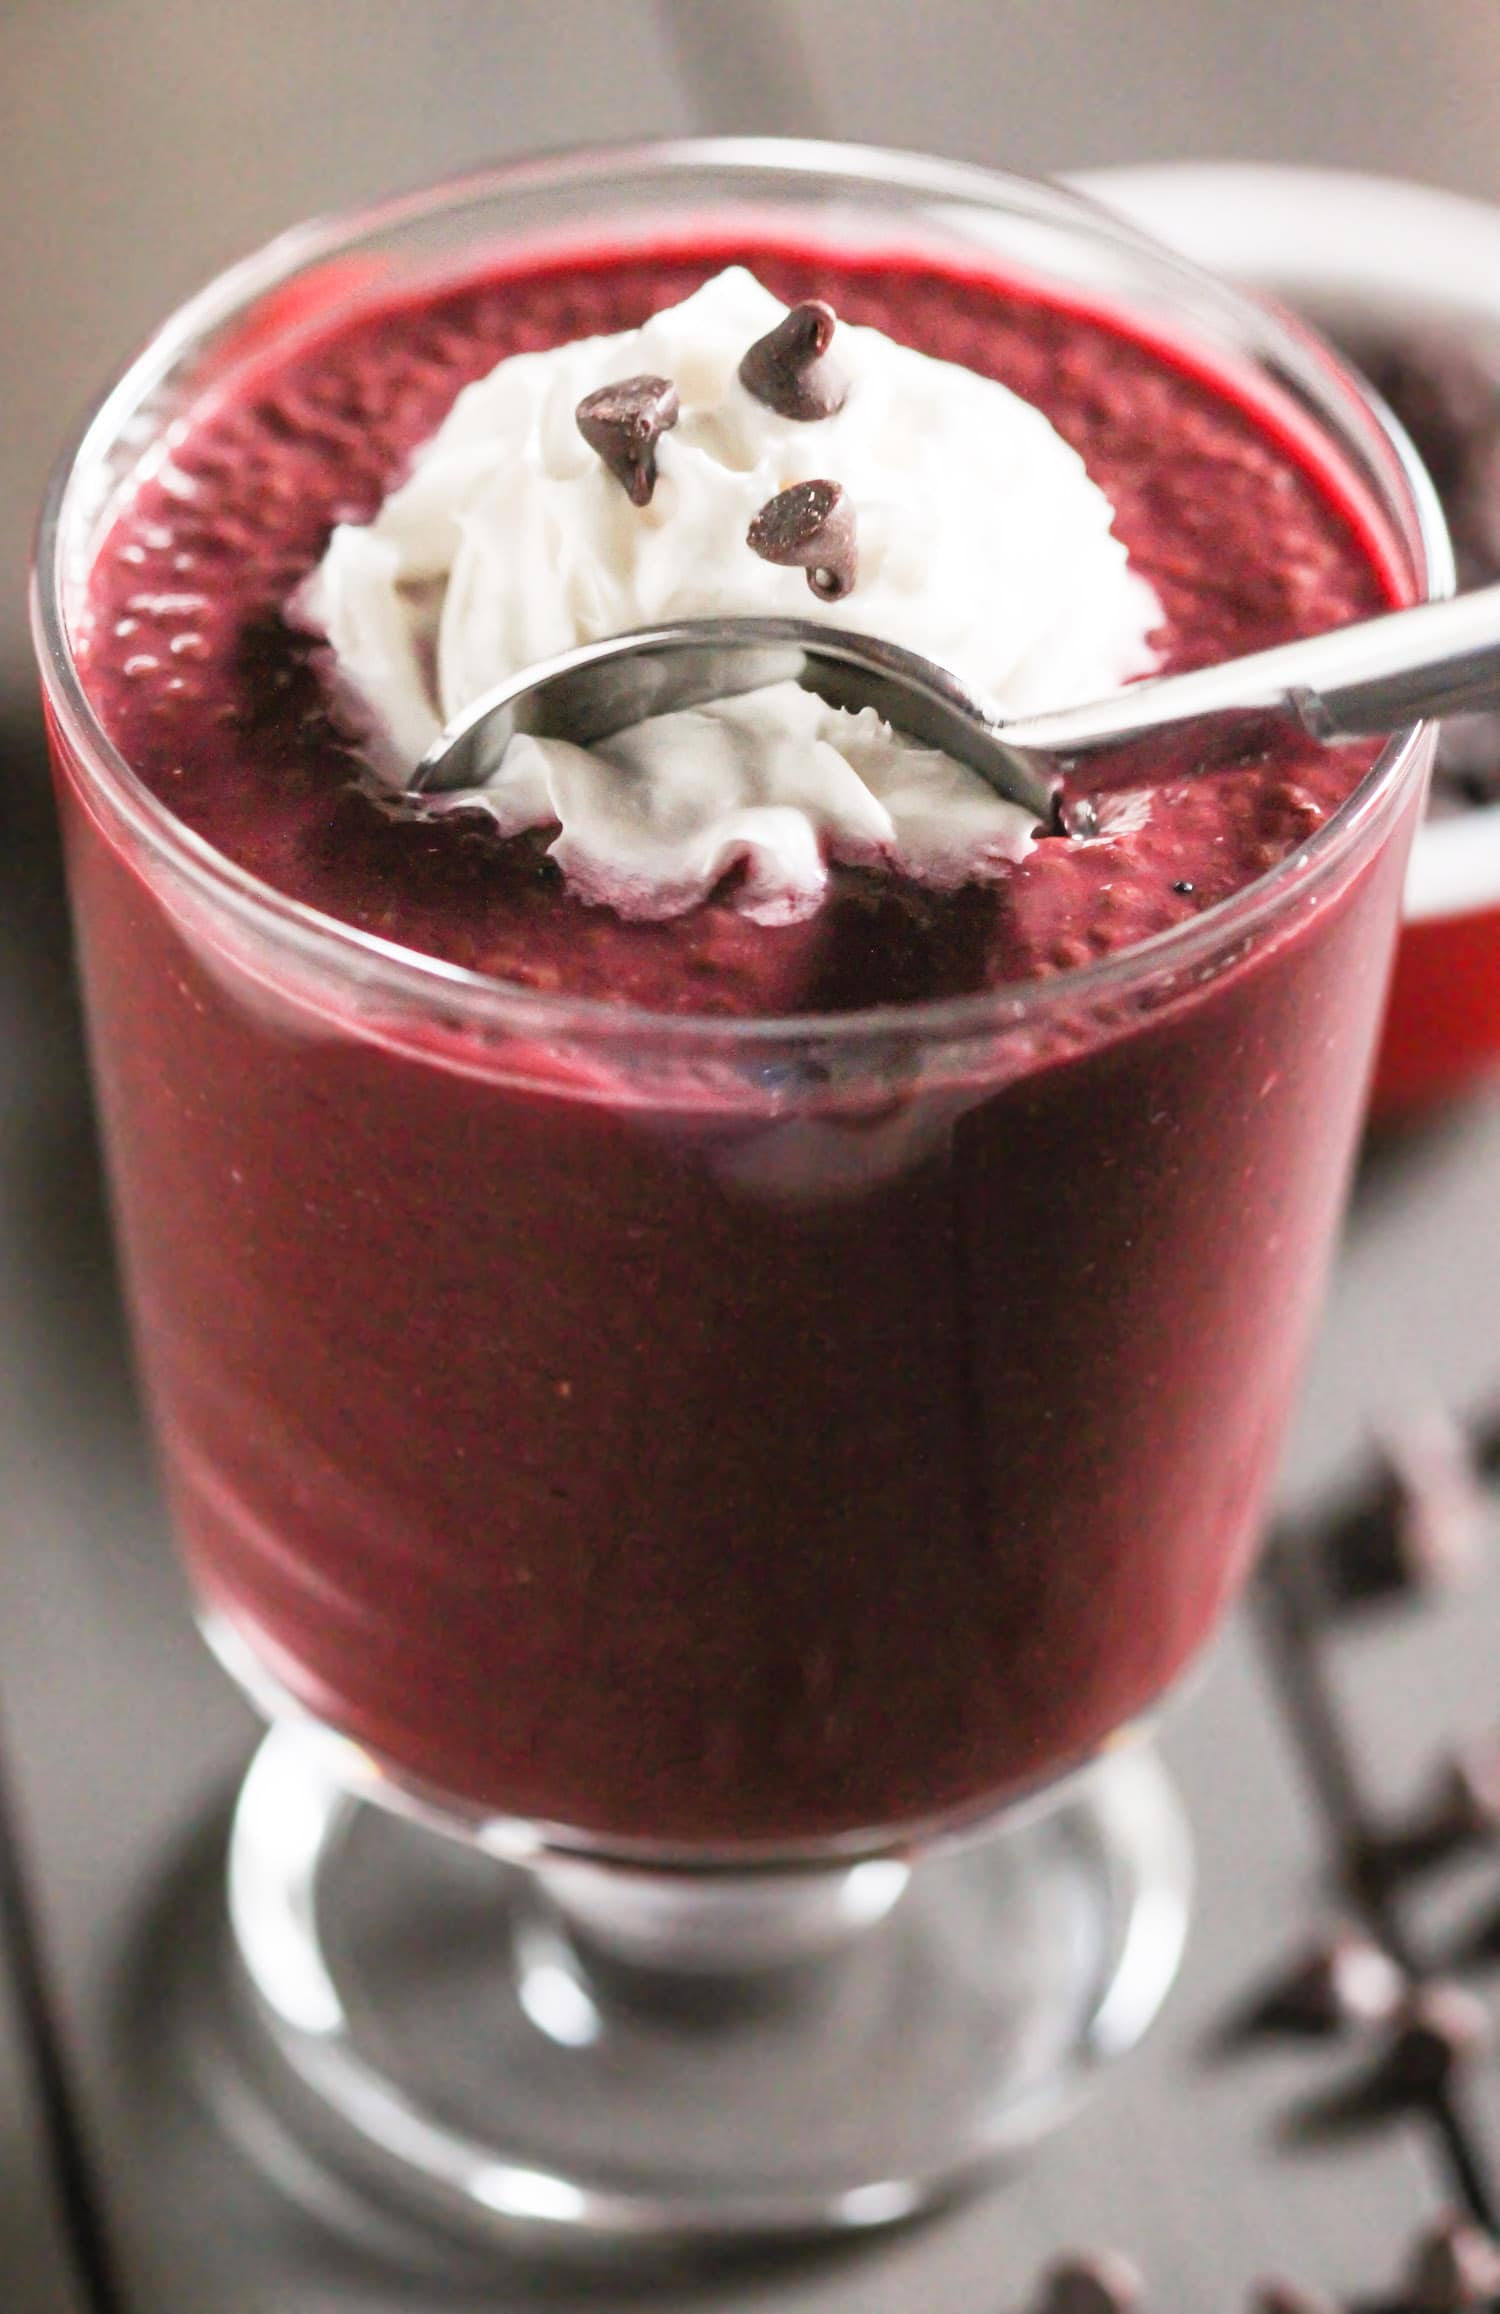 Have dessert for breakfast with this Healthy Red Velvet Chia Seed Pudding! This sweet and chocolatey recipe is all natural (no artificial food dyes here), sugar free, low carb, high fiber, gluten free, dairy free, and vegan. Satisfy your morning sweet tooth while getting in some nutrition! Healthy Dessert Recipes with low calorie, low fat, high protein, and raw options at the Desserts With Benefits Blog.